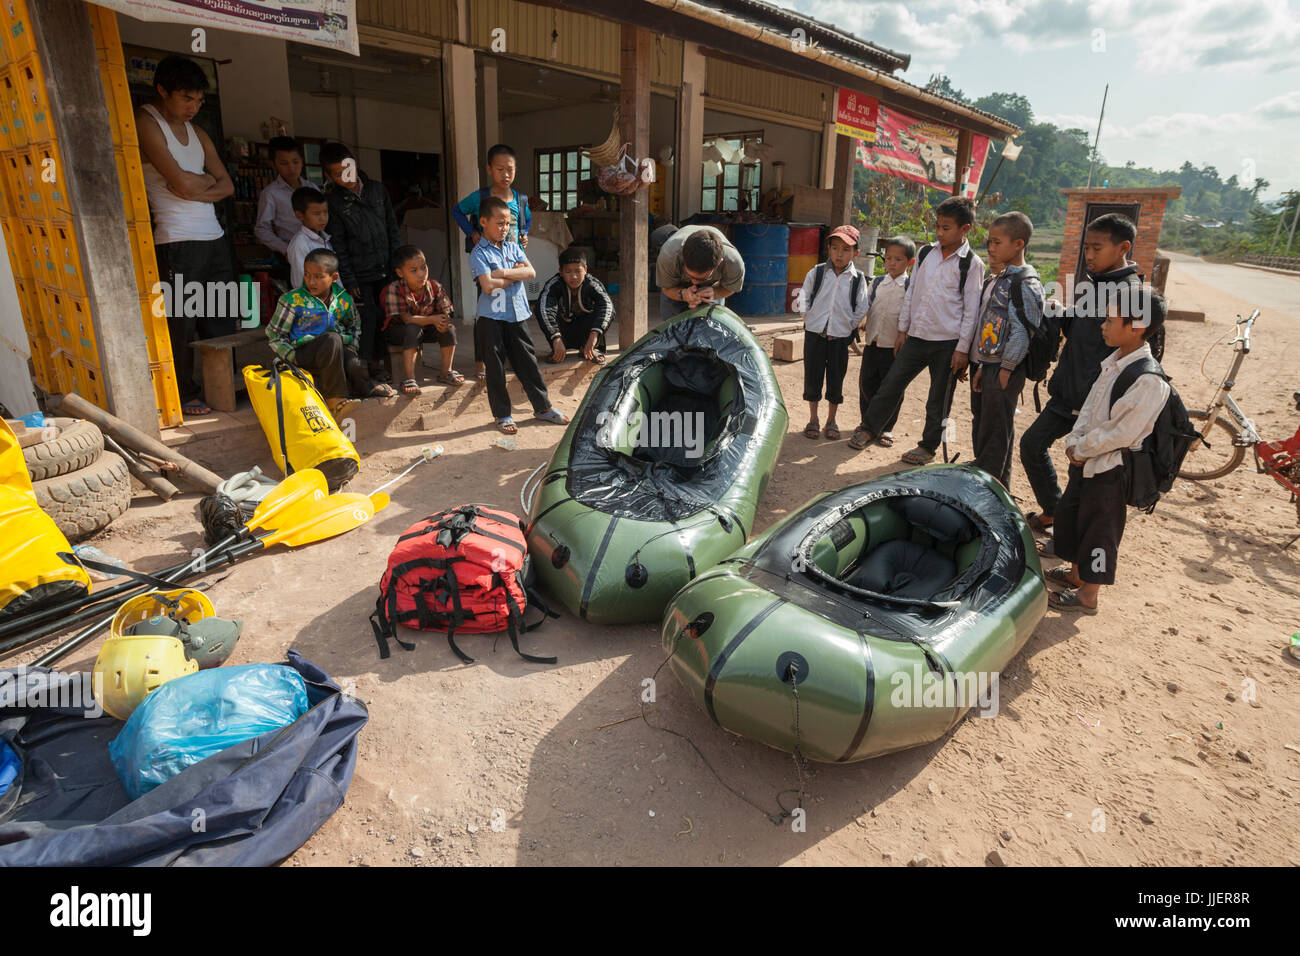 Robert Hahn inflates his packraft in front of a large audience of schoolboys in Ban Tang, Laos. Stock Photo